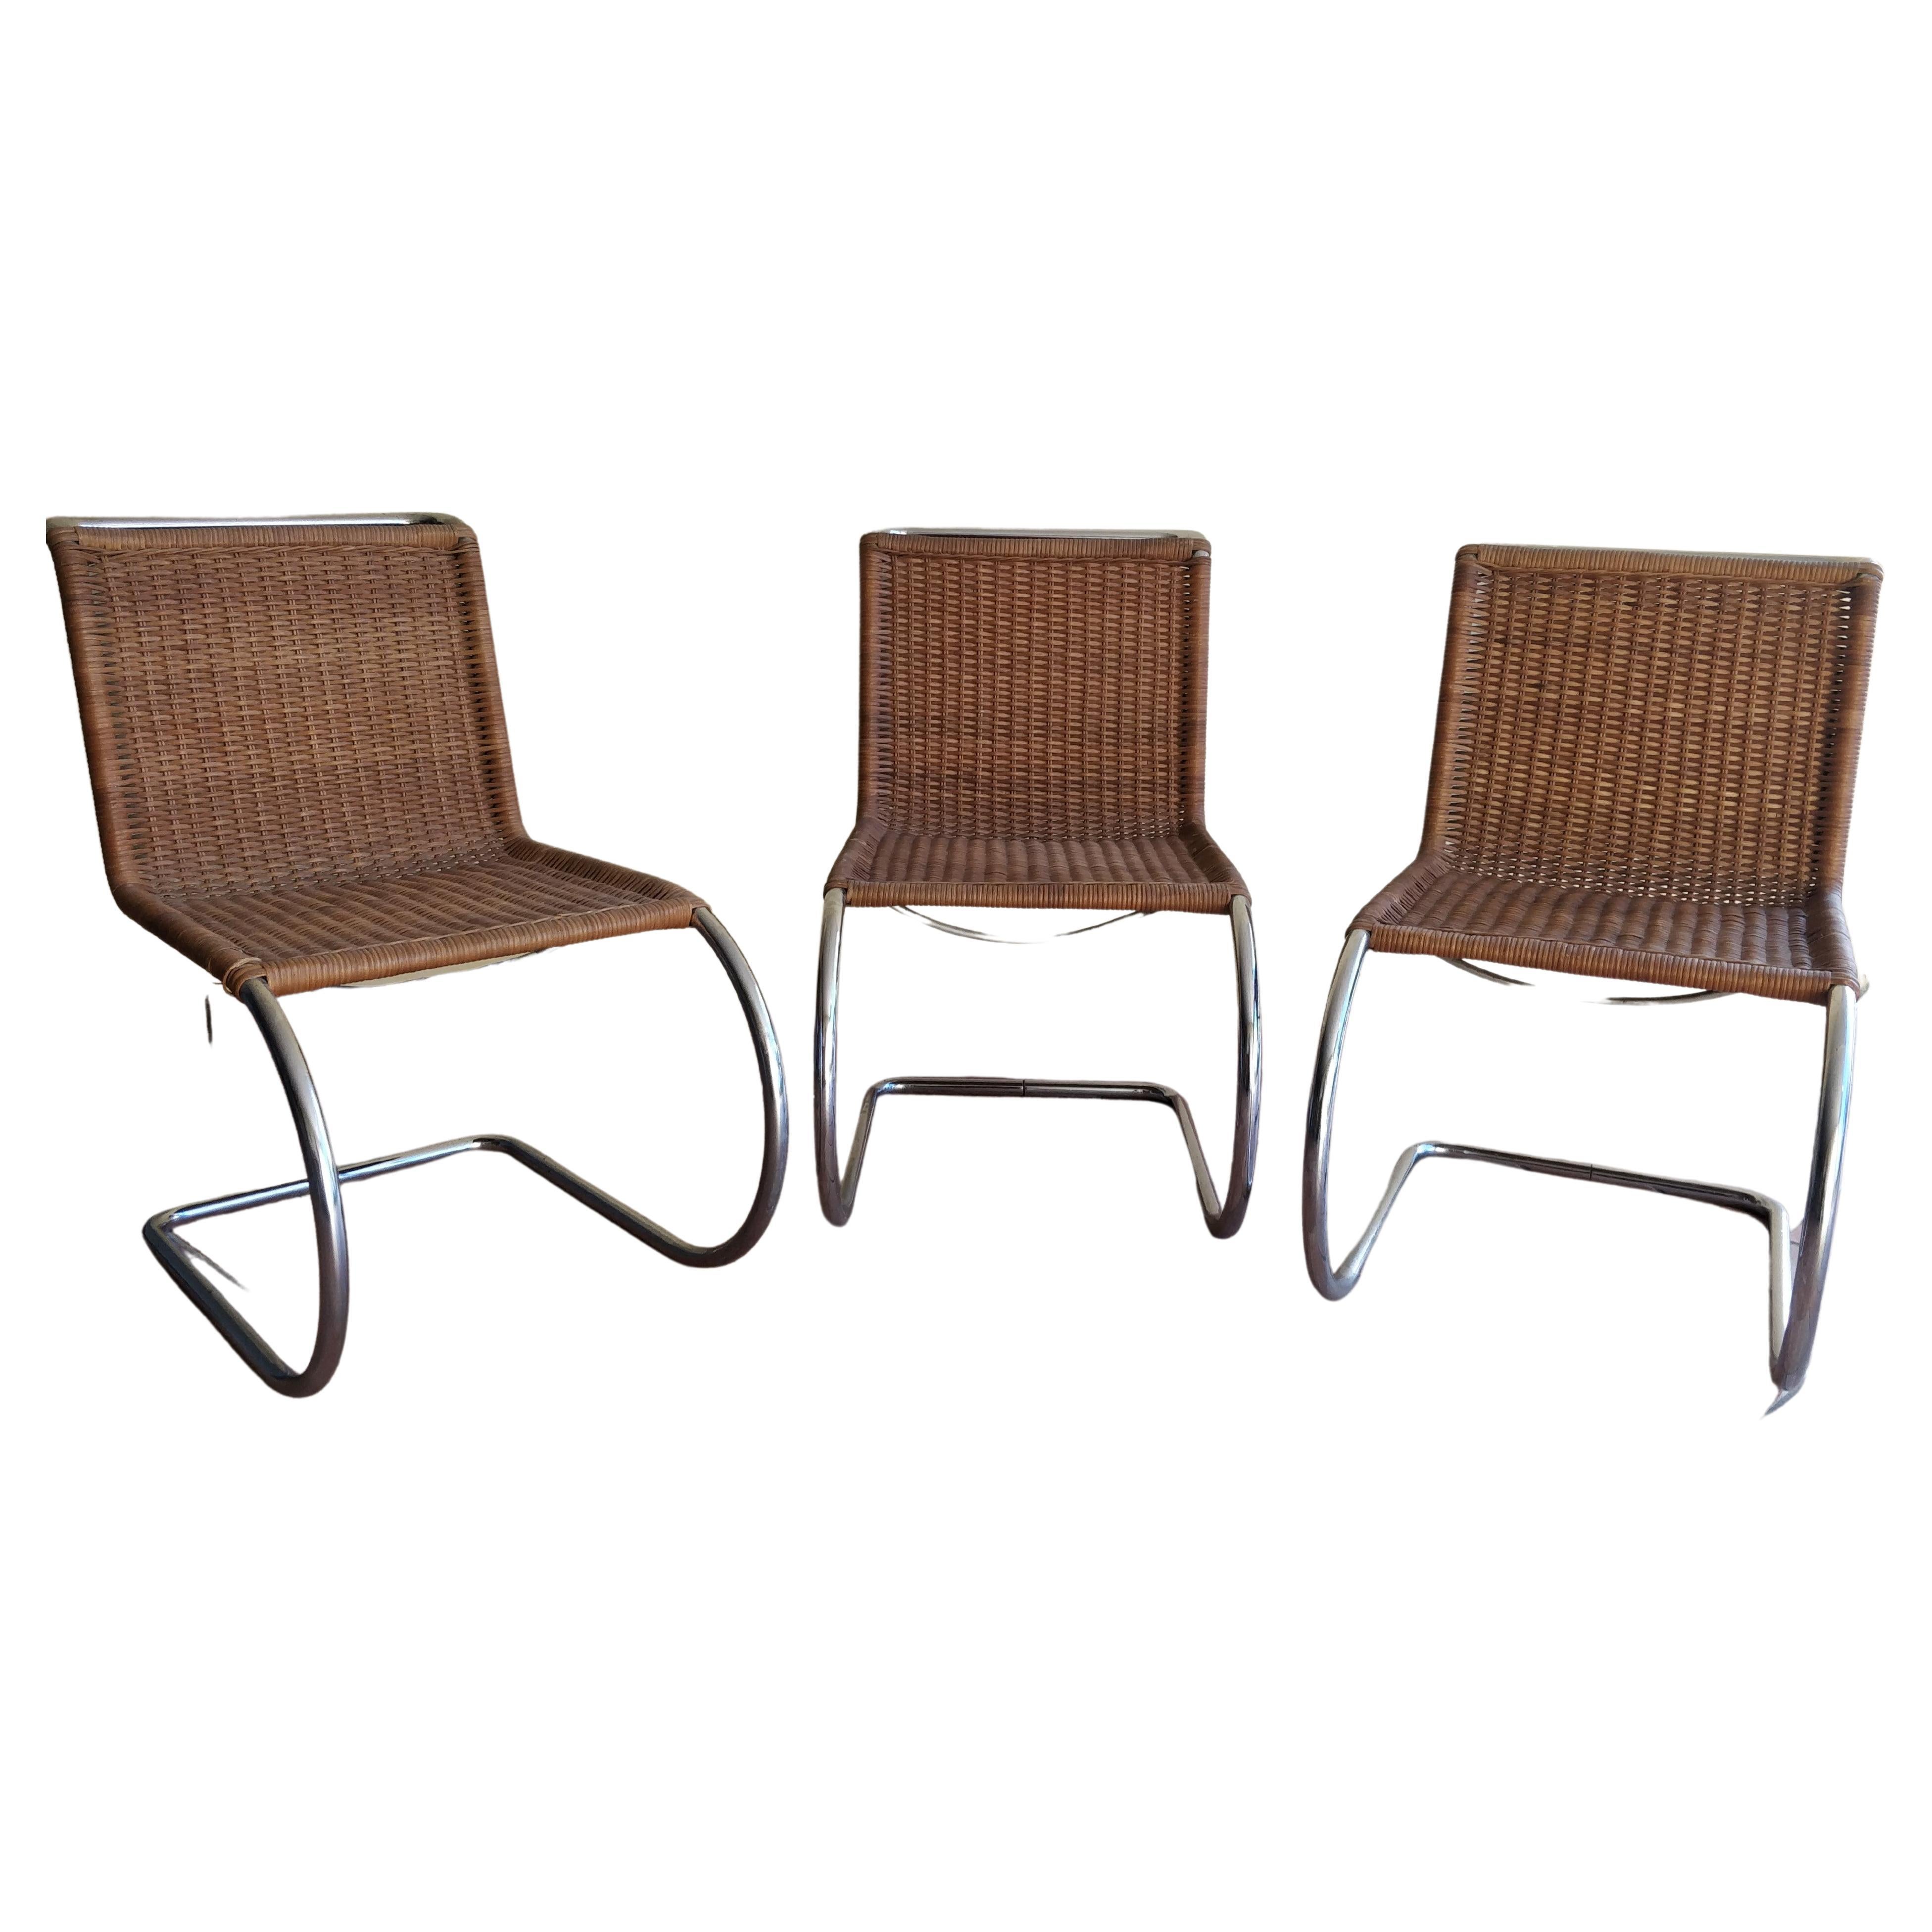 Ludwig Mies van der Rohe "MR10" by Thonet Set 3 Chair For Sale